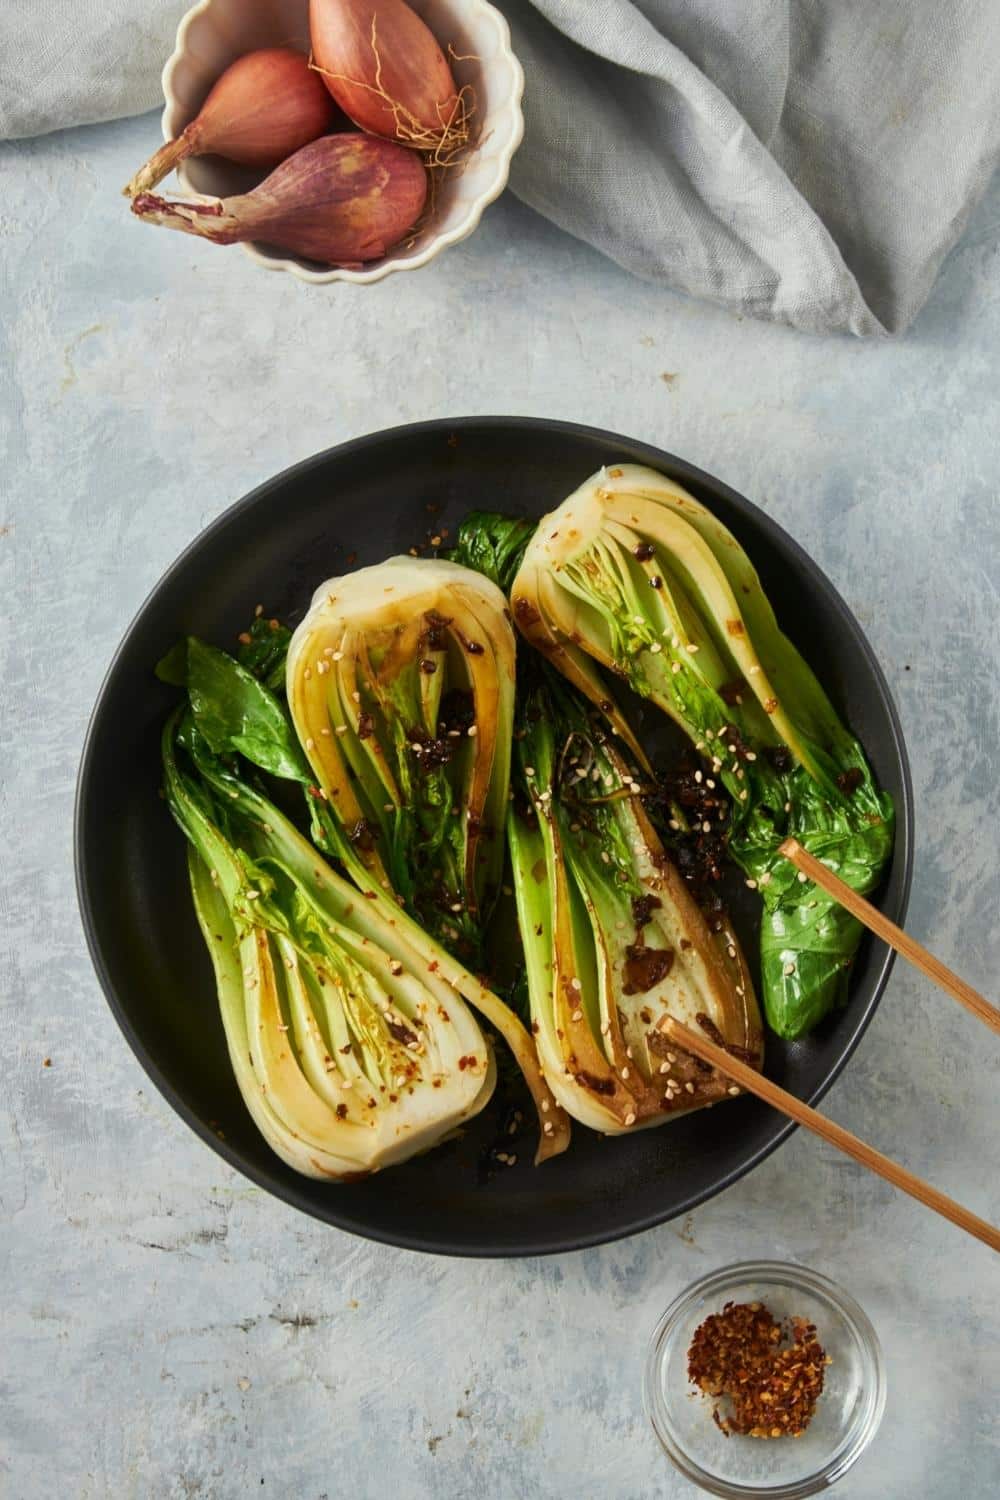 Four bok choy halves cooking in a skillet with red pepper flaked on top.